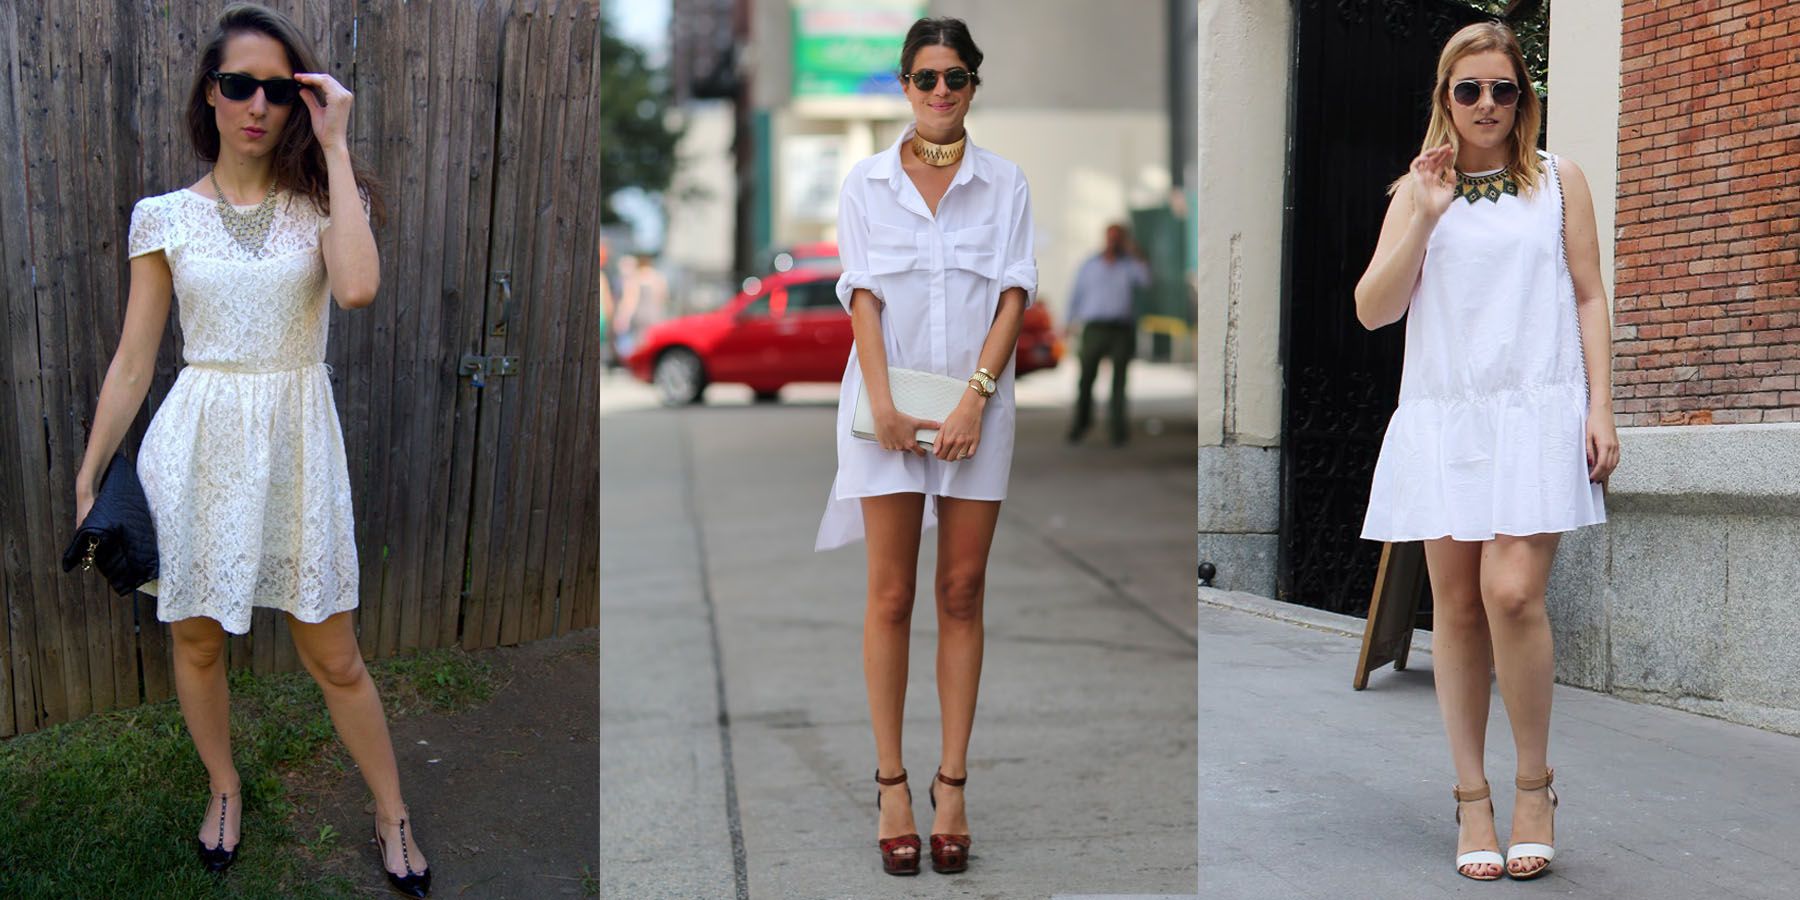 Come on, look more chic with a white dress!